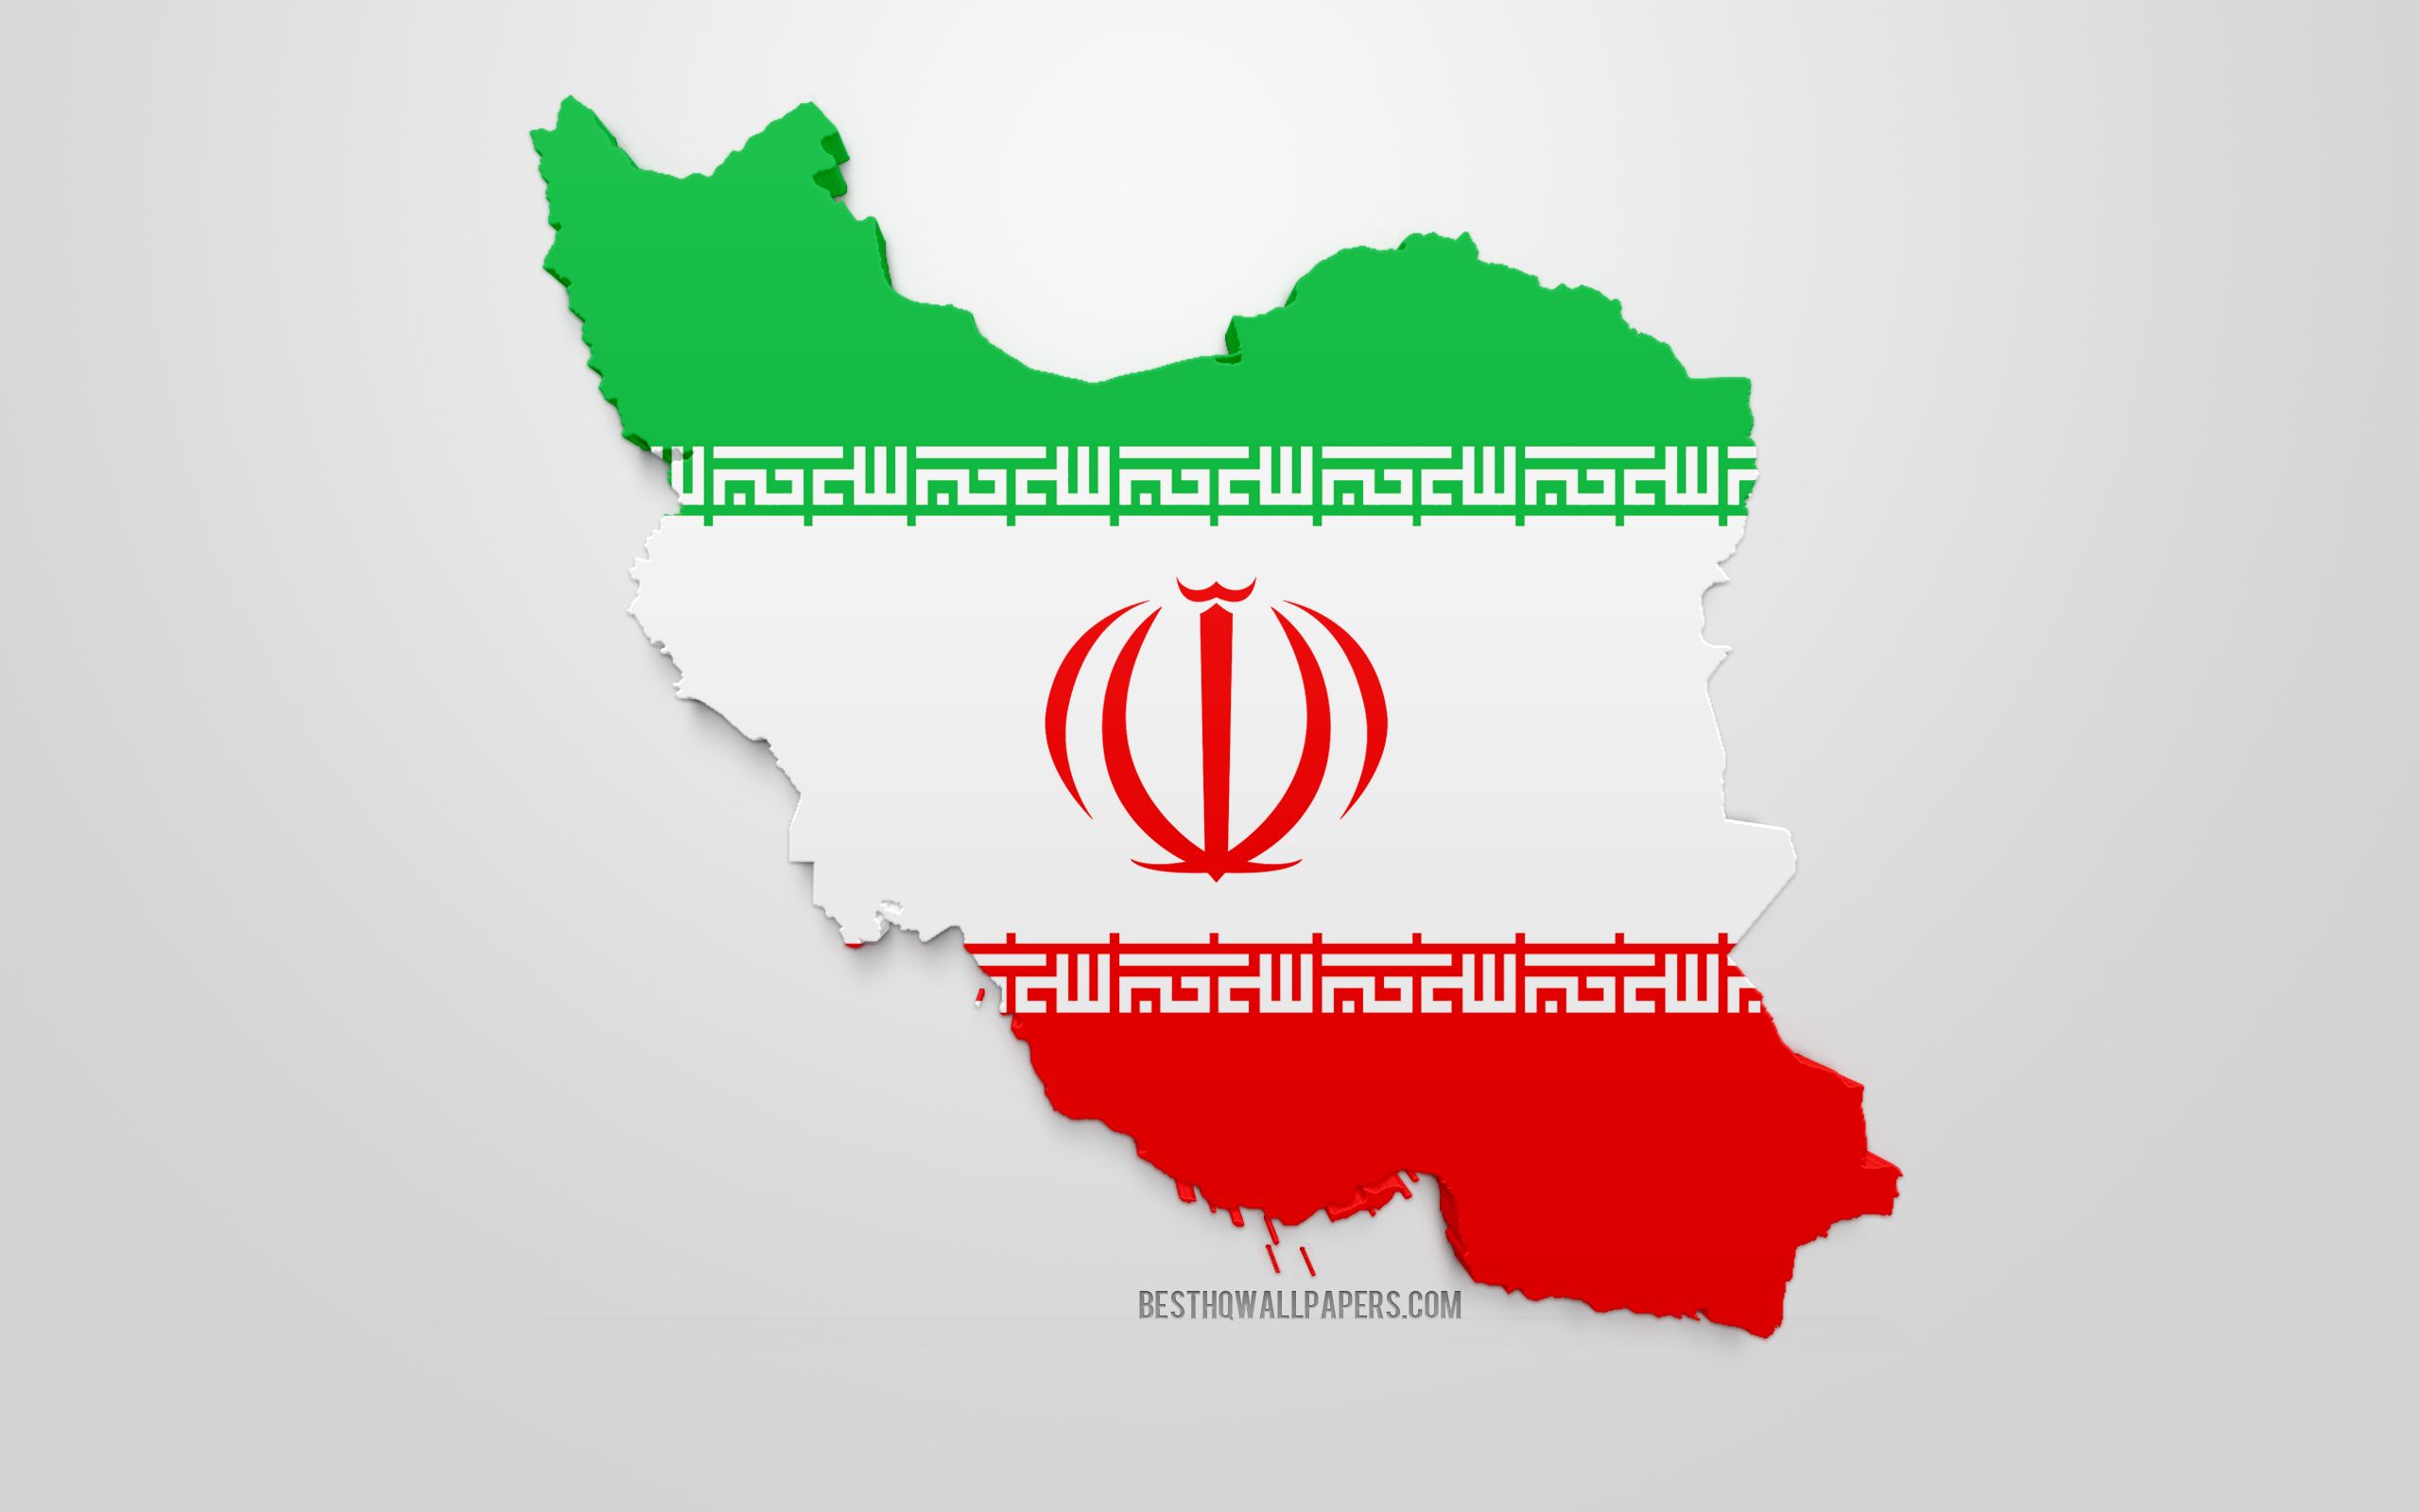 Download wallpaper 3D flag of Iran, map silhouette of Iran, 3D art, Iran flag, Asia, Iran, geography, Iran 3D silhouette for desktop with resolution 2560x1600. High Quality HD picture wallpaper